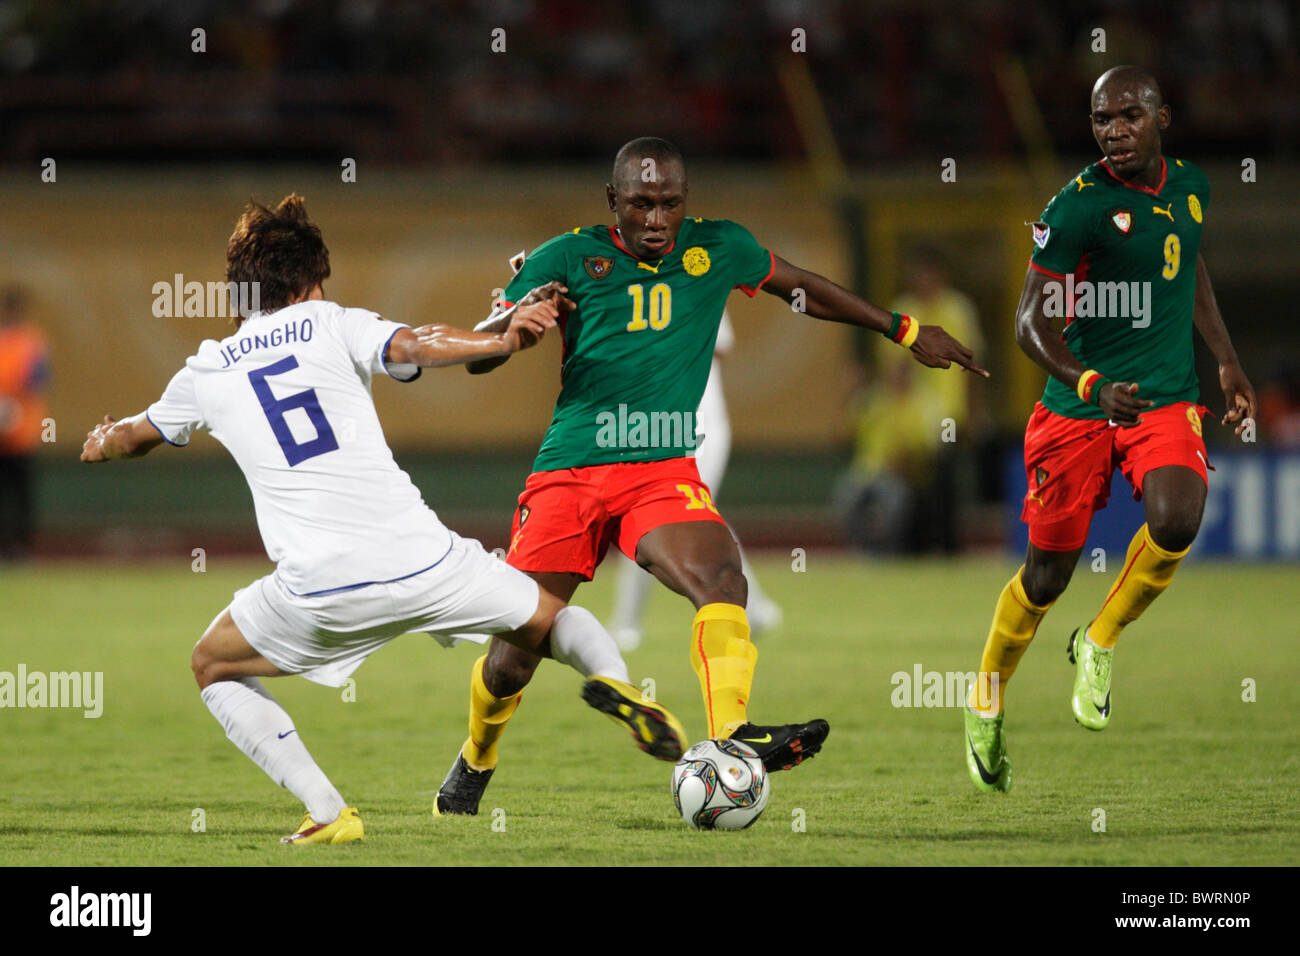 Jacques Zoua of Cameroon (10) in action against Jeong Ho Hong of South Korea (6) during a FIFA U-20 World Cup Group C match Stock Photo